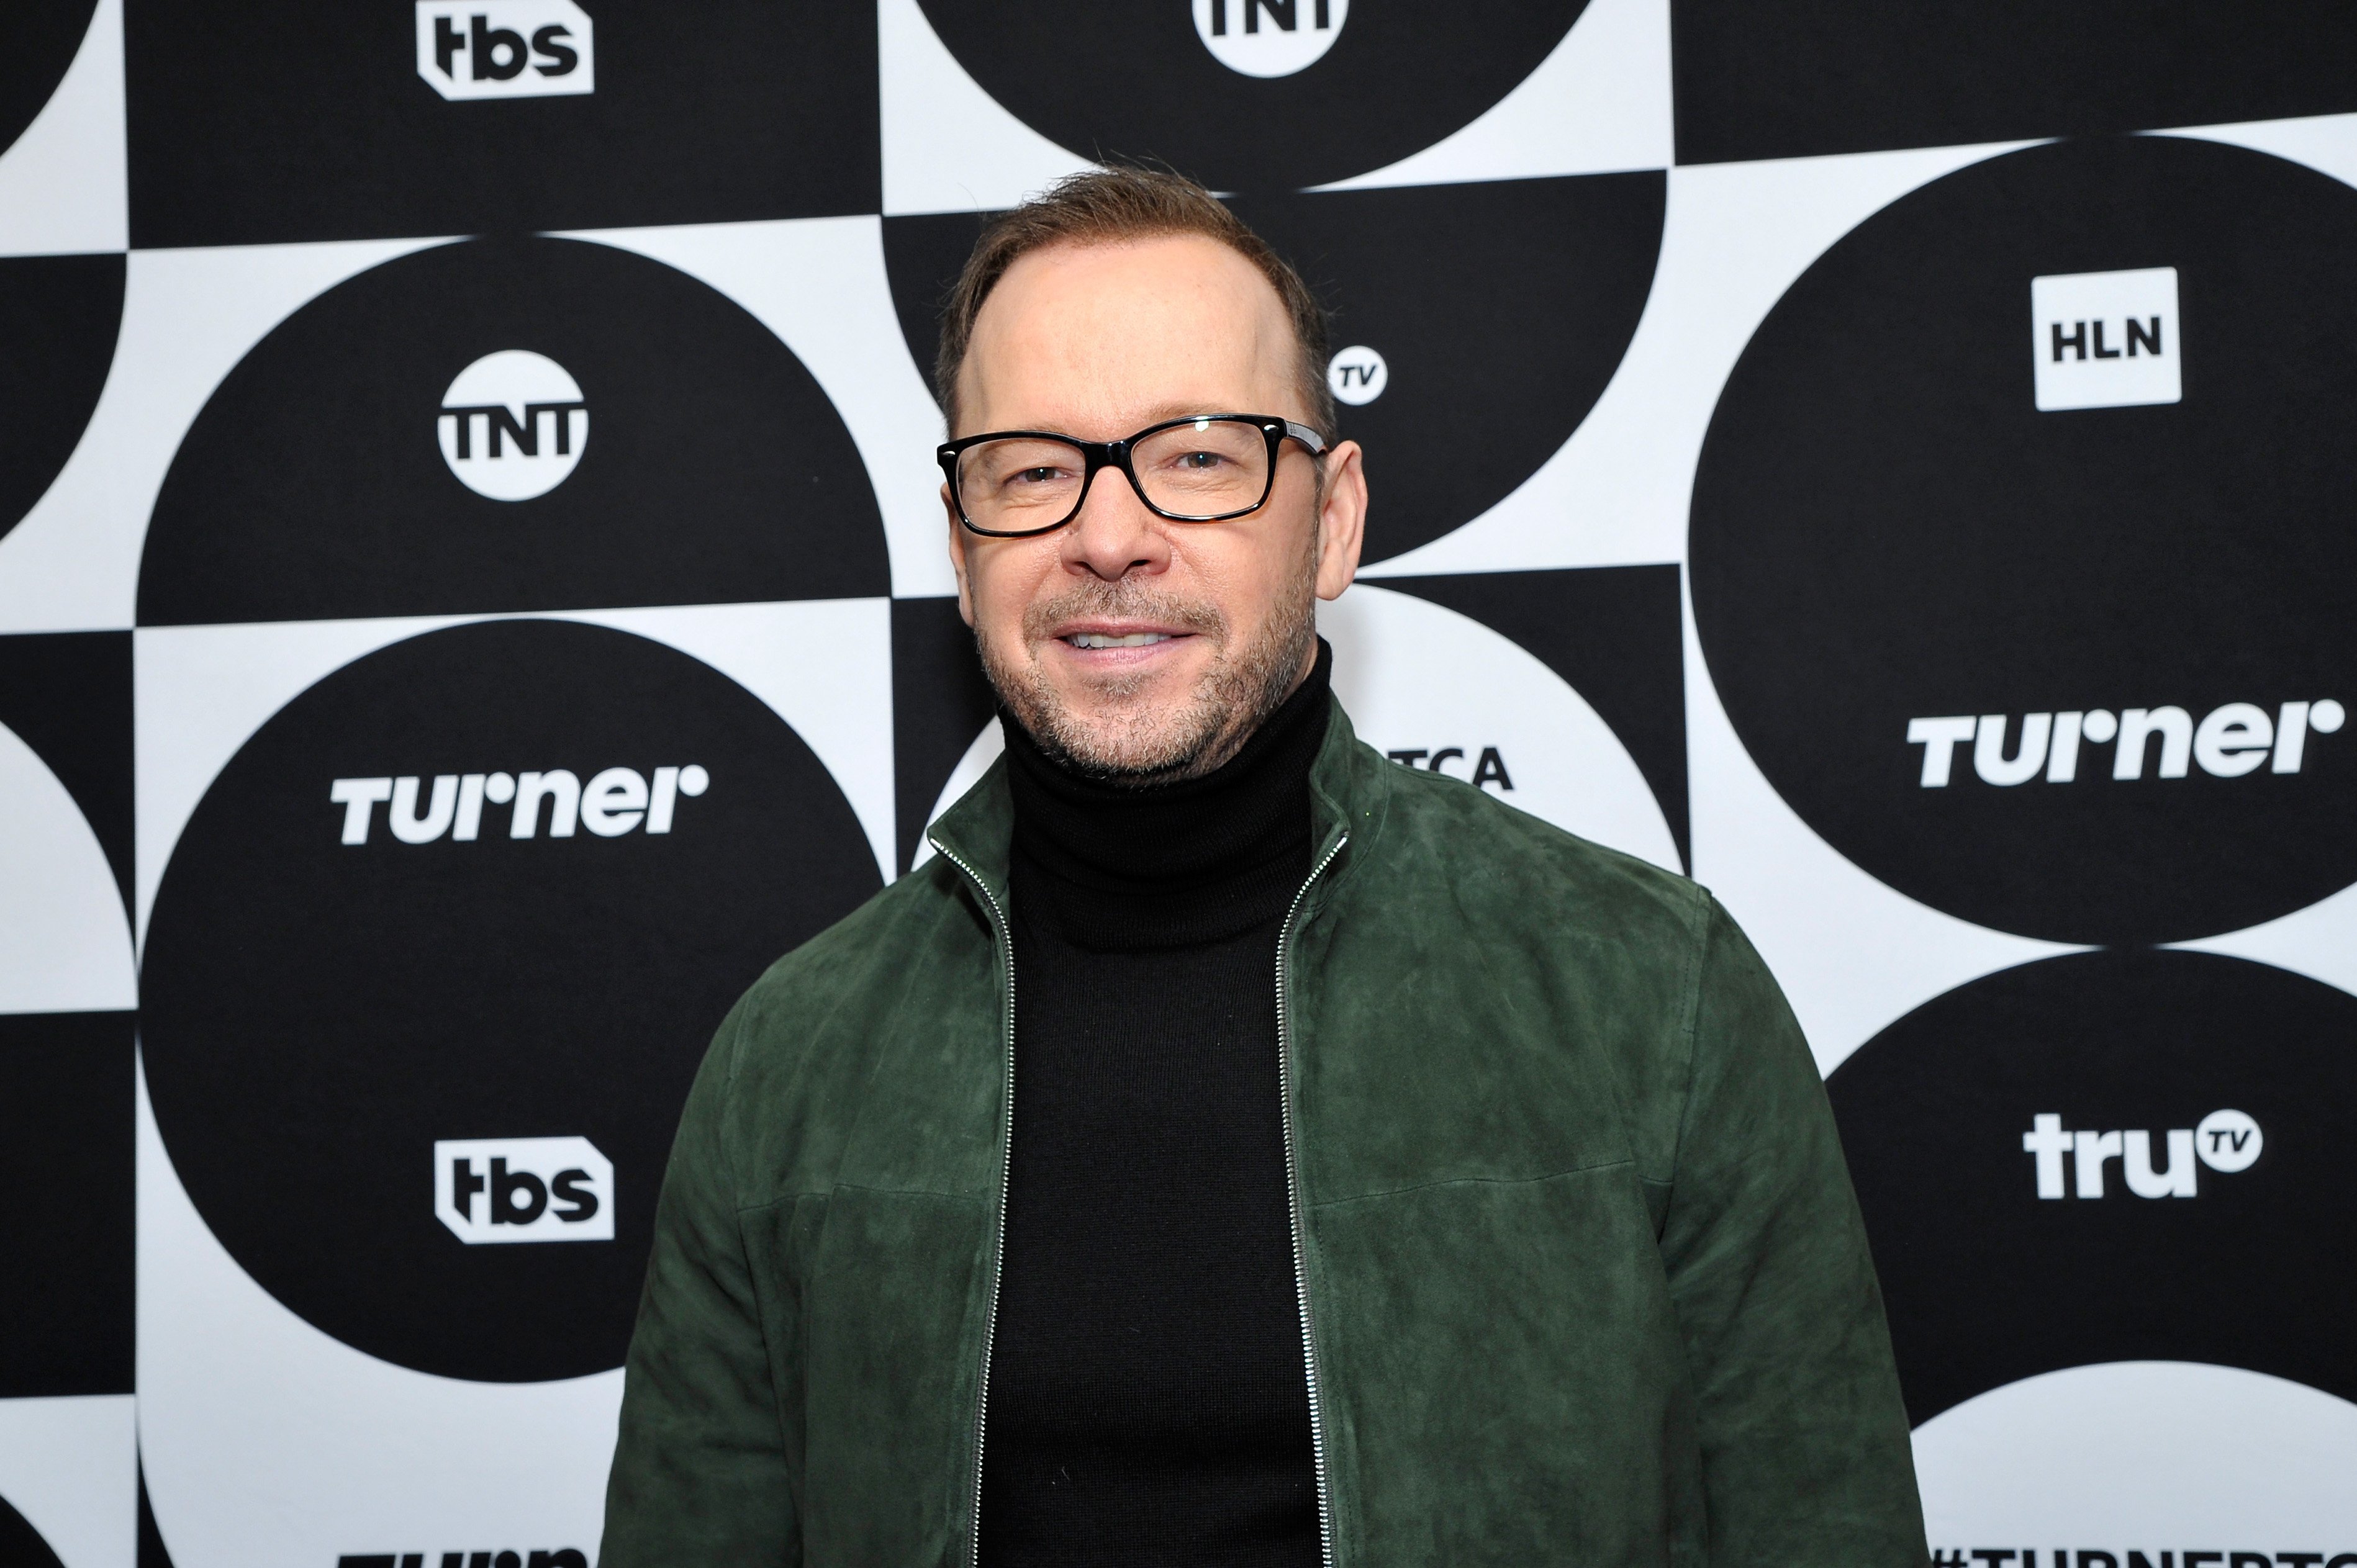 Donnie Wahlberg atttends the TCA Turner Winter Press Tour in Pasadena, California on February 11, 2019 | Photo: Getty Images